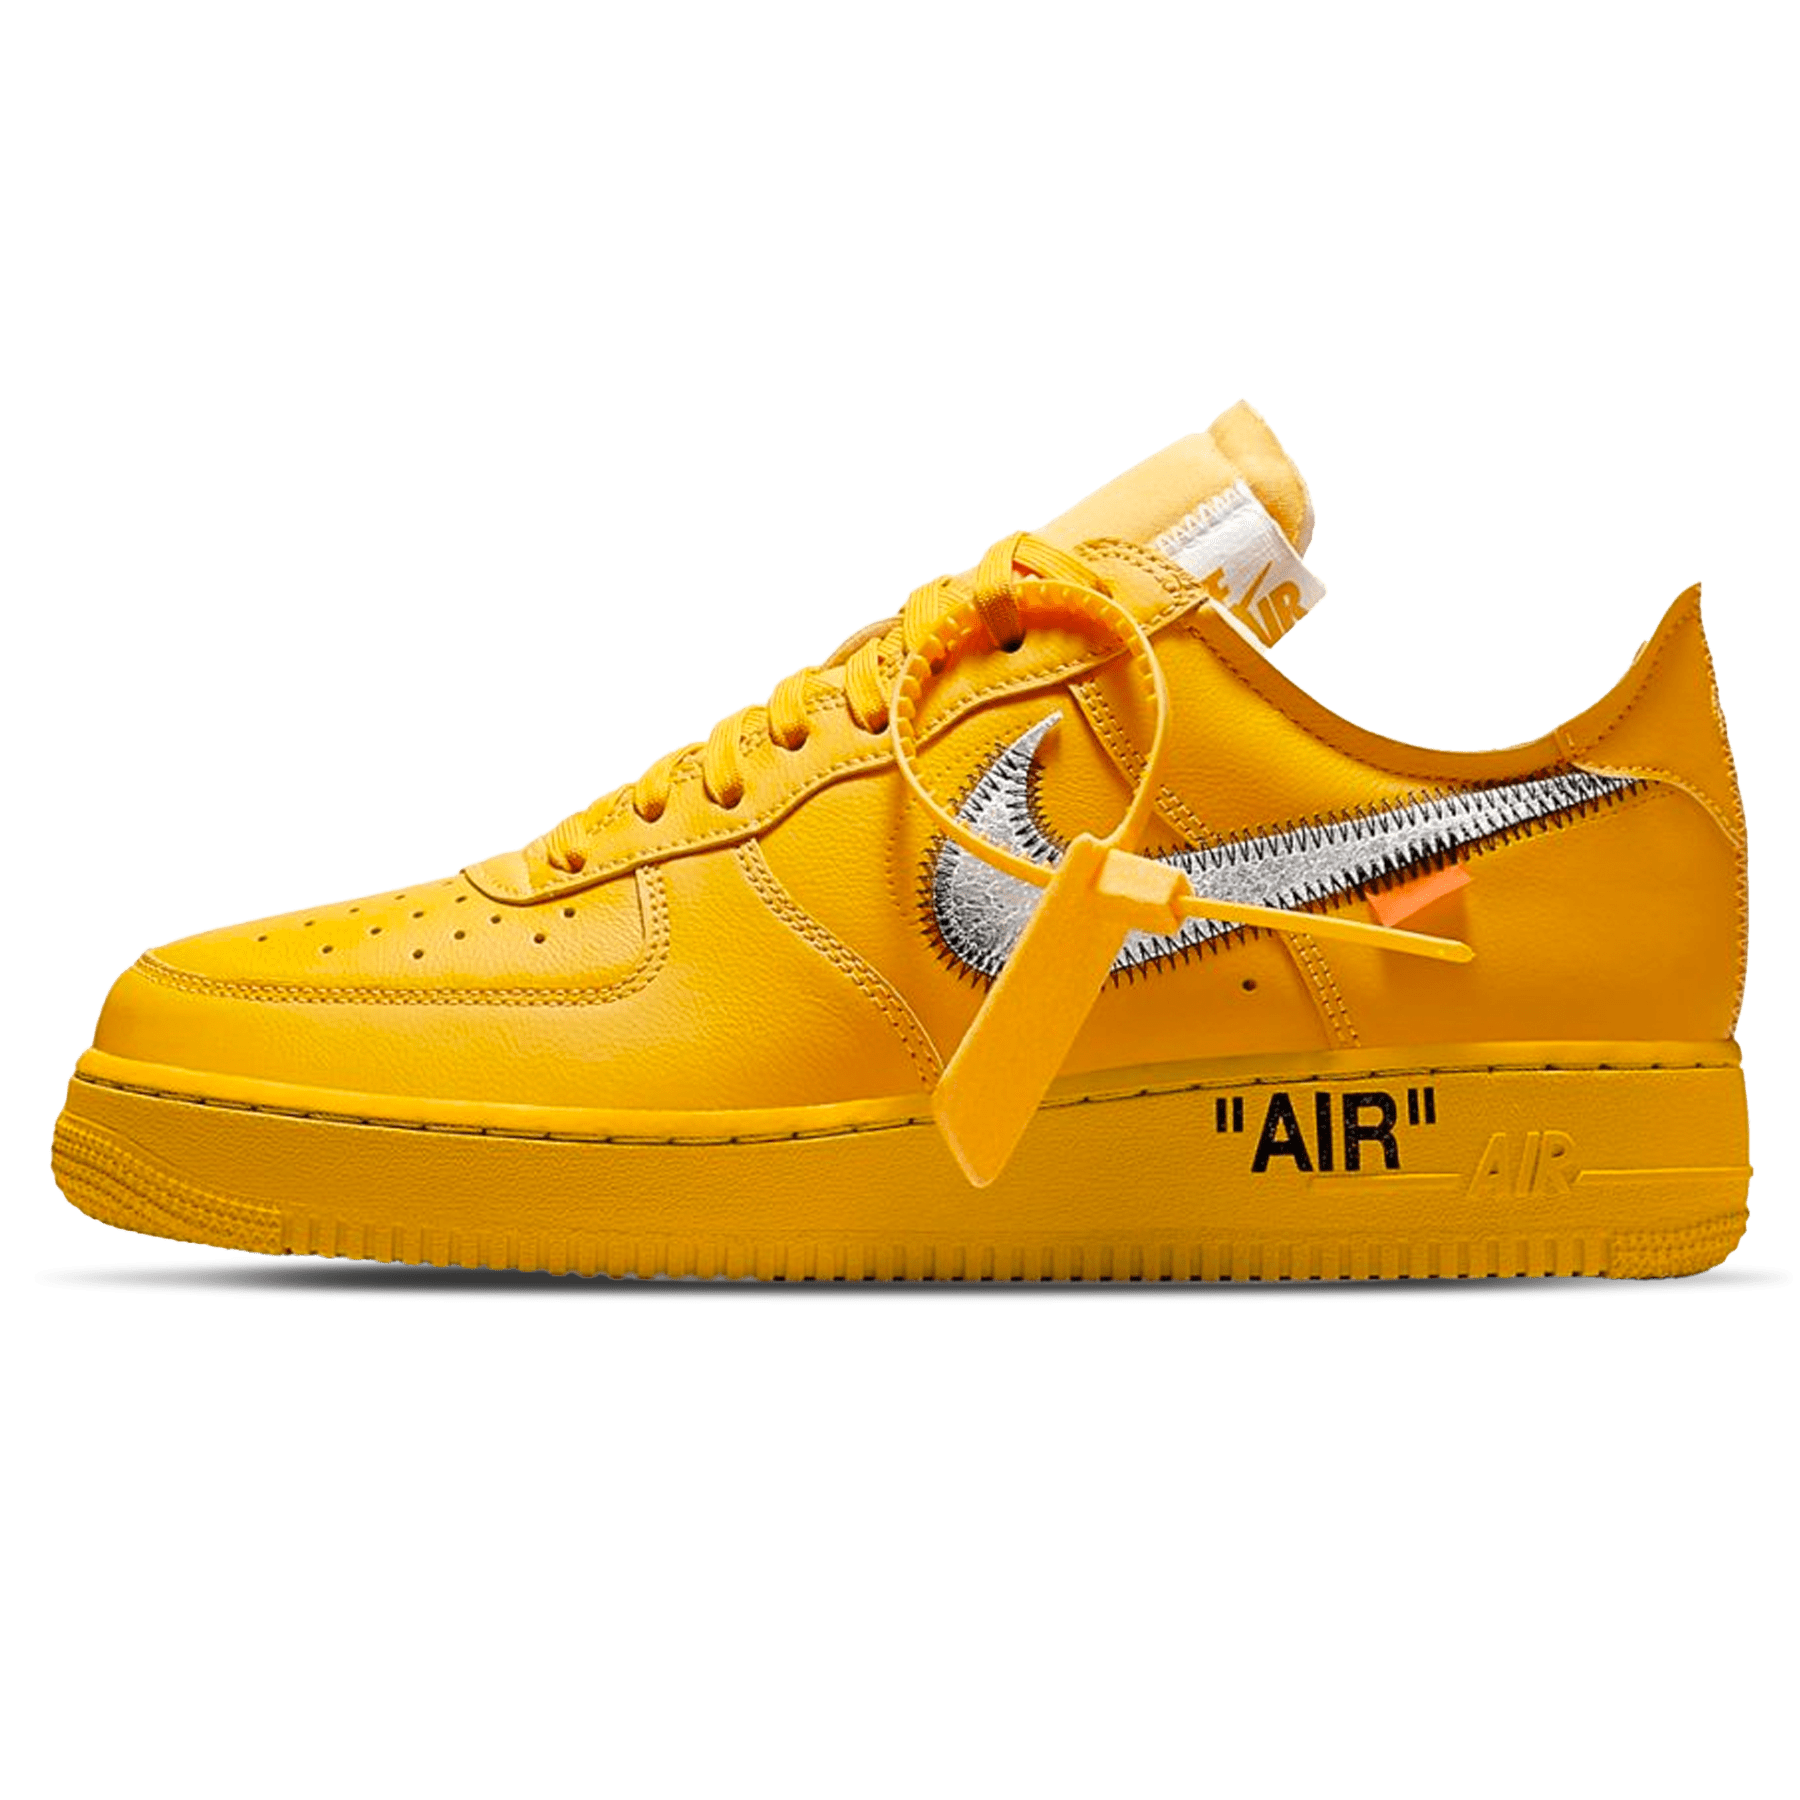 Air Force 1 Low X Virgil Abloh Online Offers, Save 56 idiomas.to